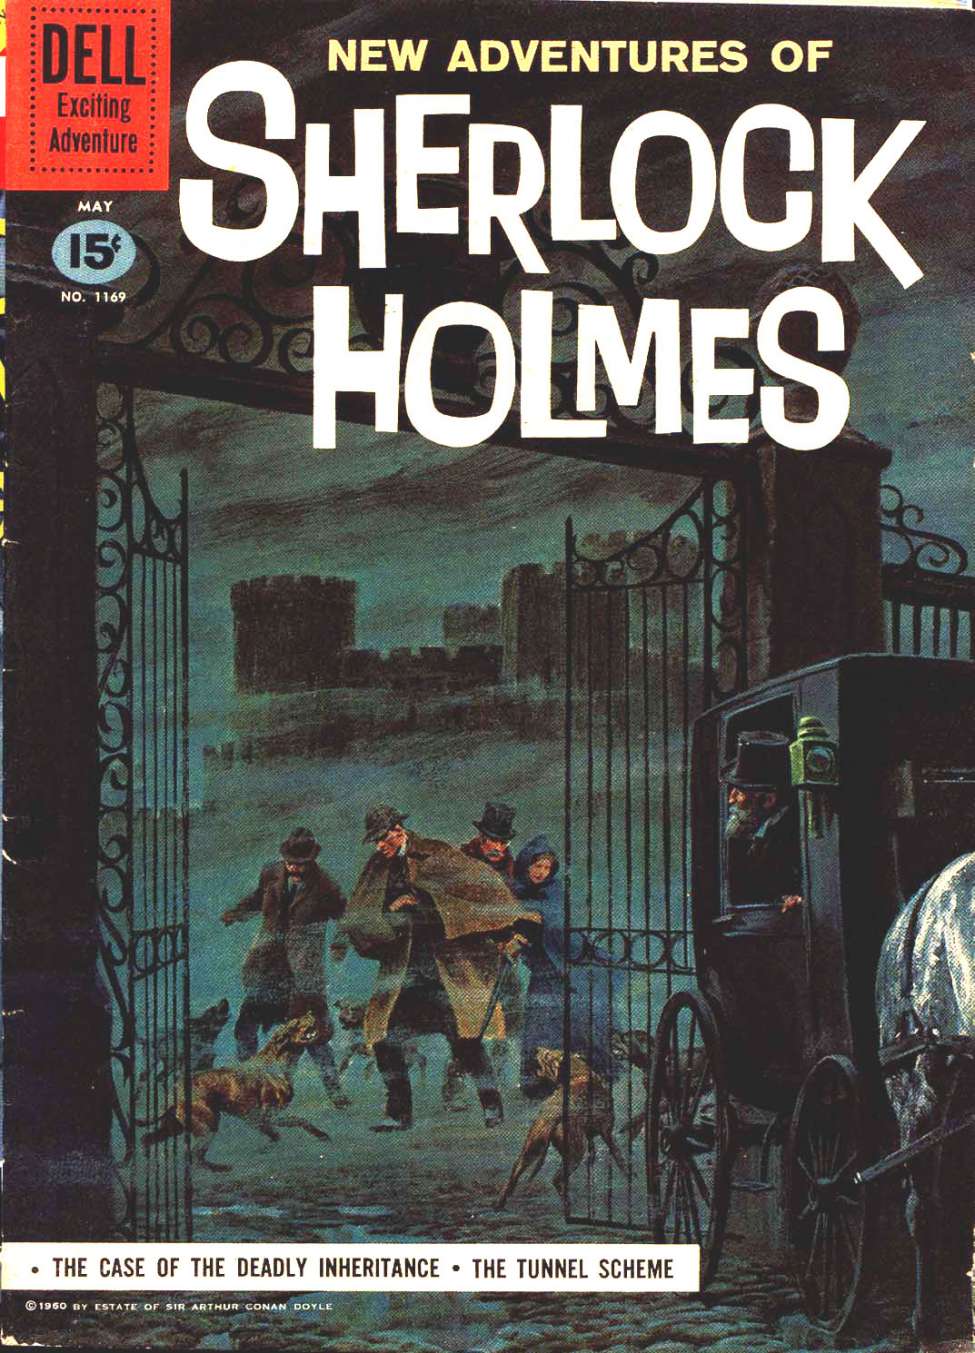 Book Cover For 1169 - New Adventures of Sherlock Holmes